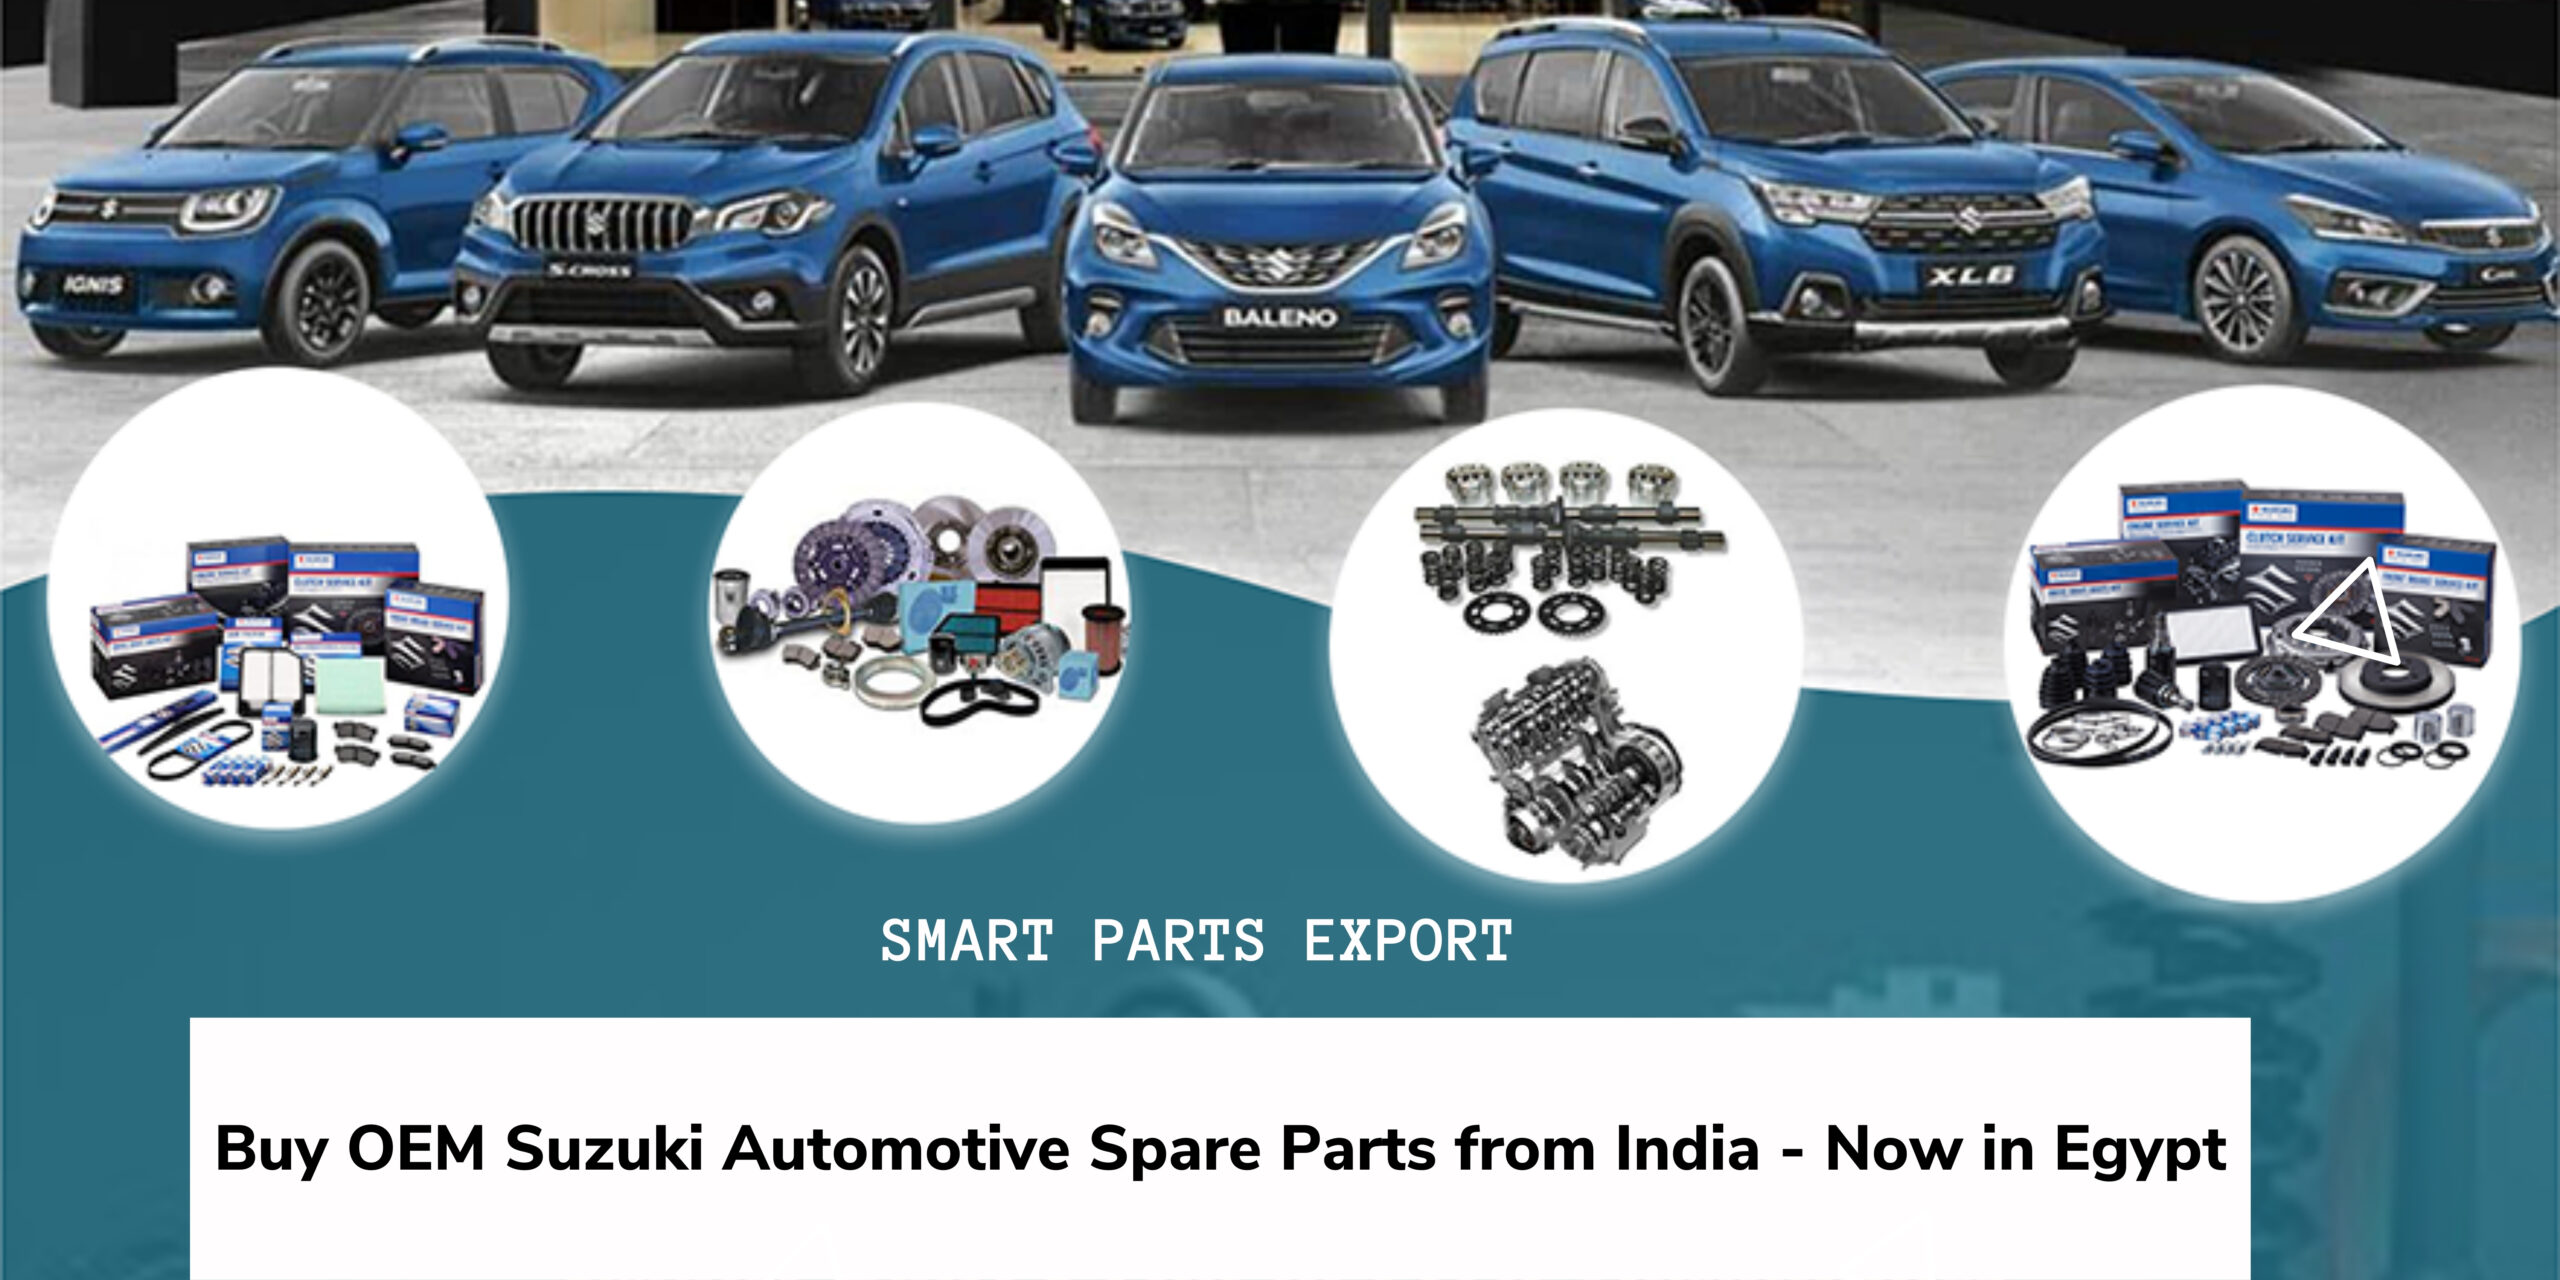 Buy OEM Suzuki Automotive Spare Parts from India - Now in Egypt